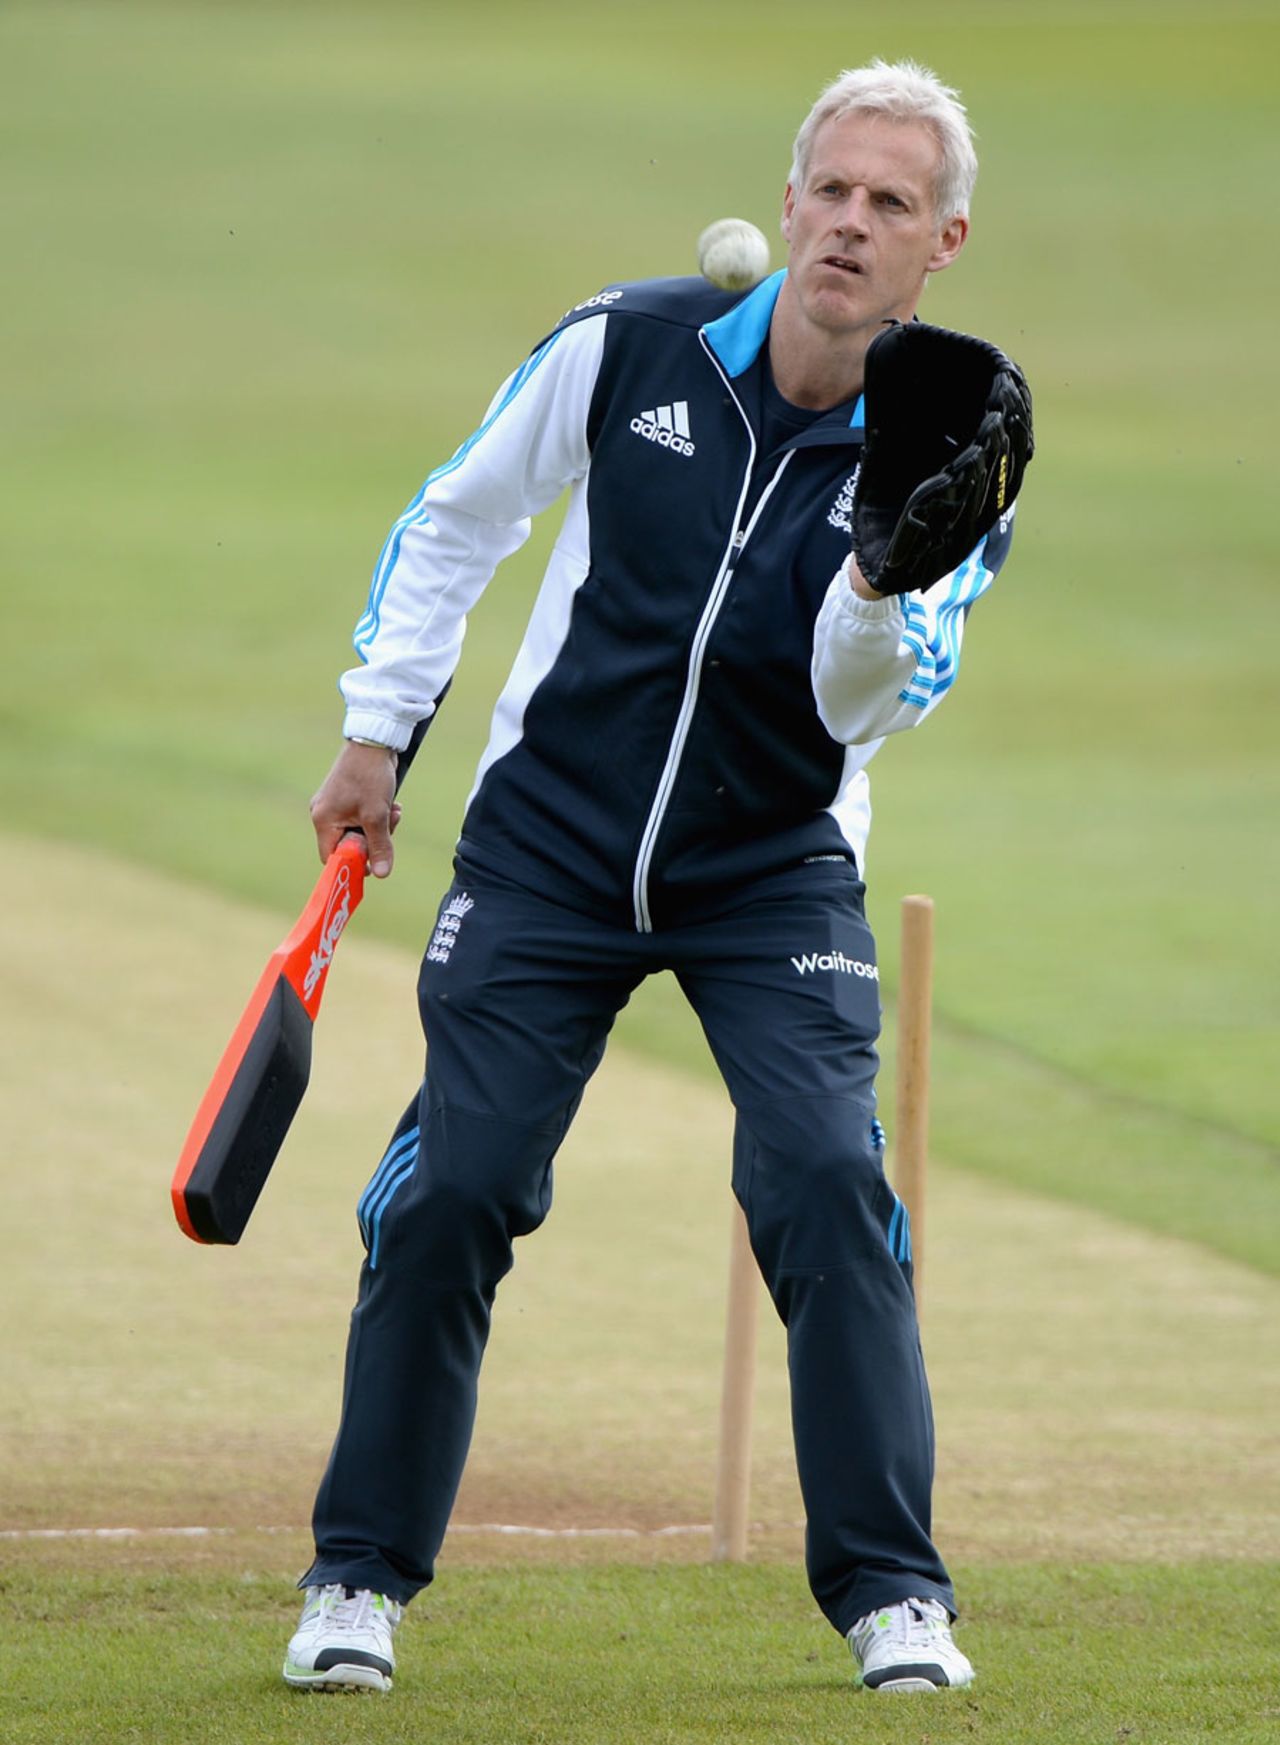 Peter Moores leads a fielding drill, Scotland v England, only ODI, Aberdeen, May 8, 2014